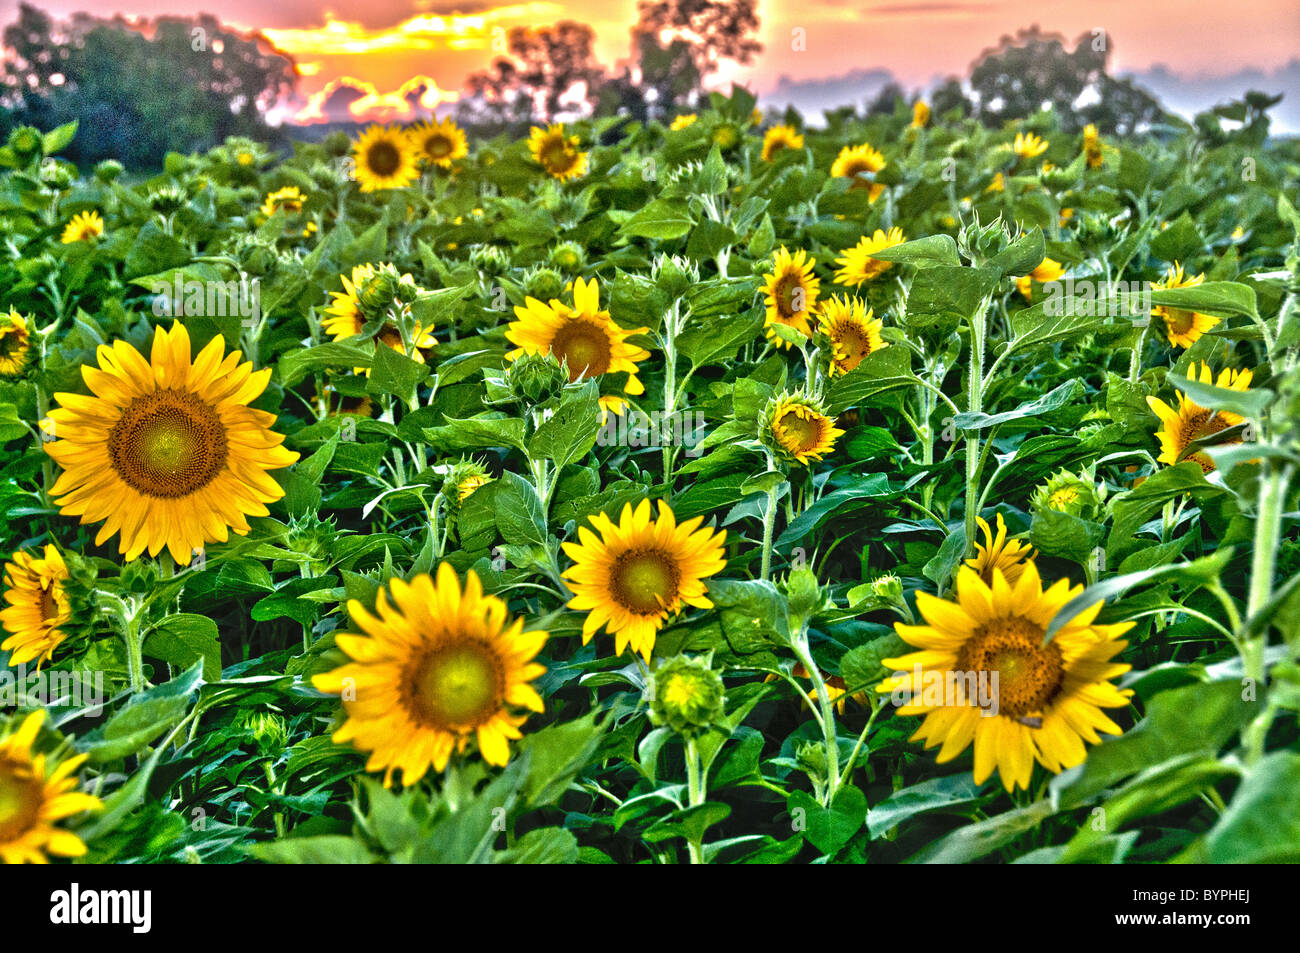 'Starry Starry Fields' - sunflowers at sunset Stock Photo